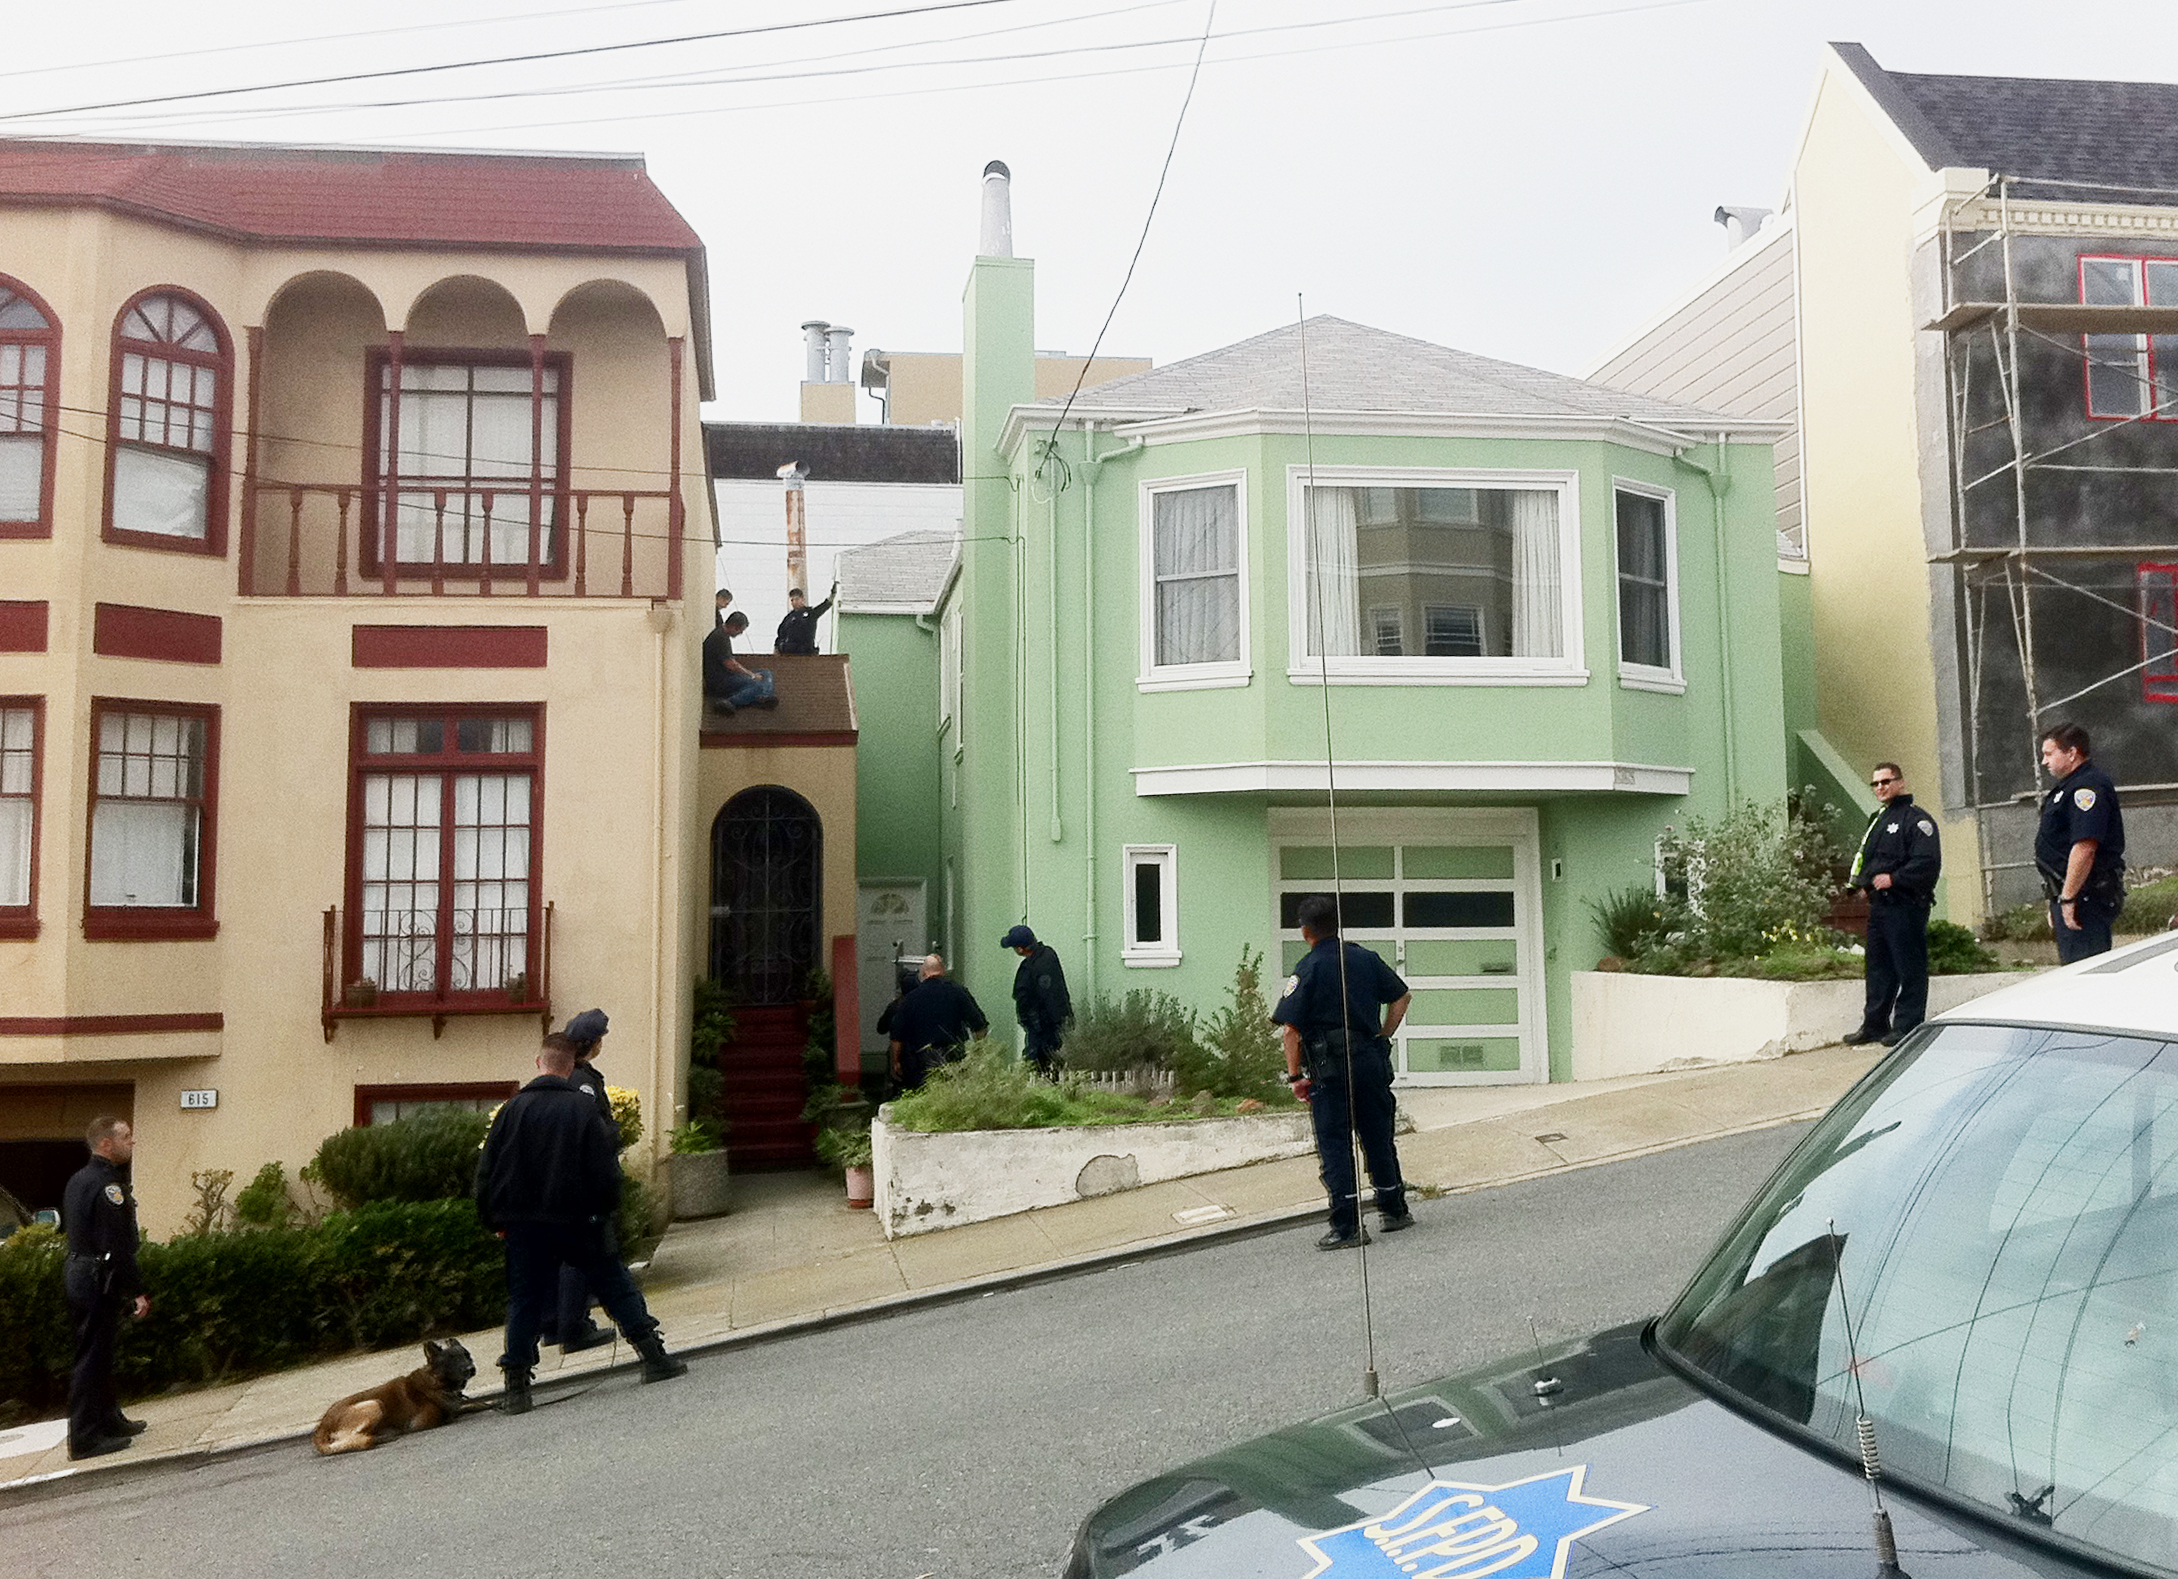 SFPD arrest a suspect on a roof on 47th Avenue. Photo by John G.